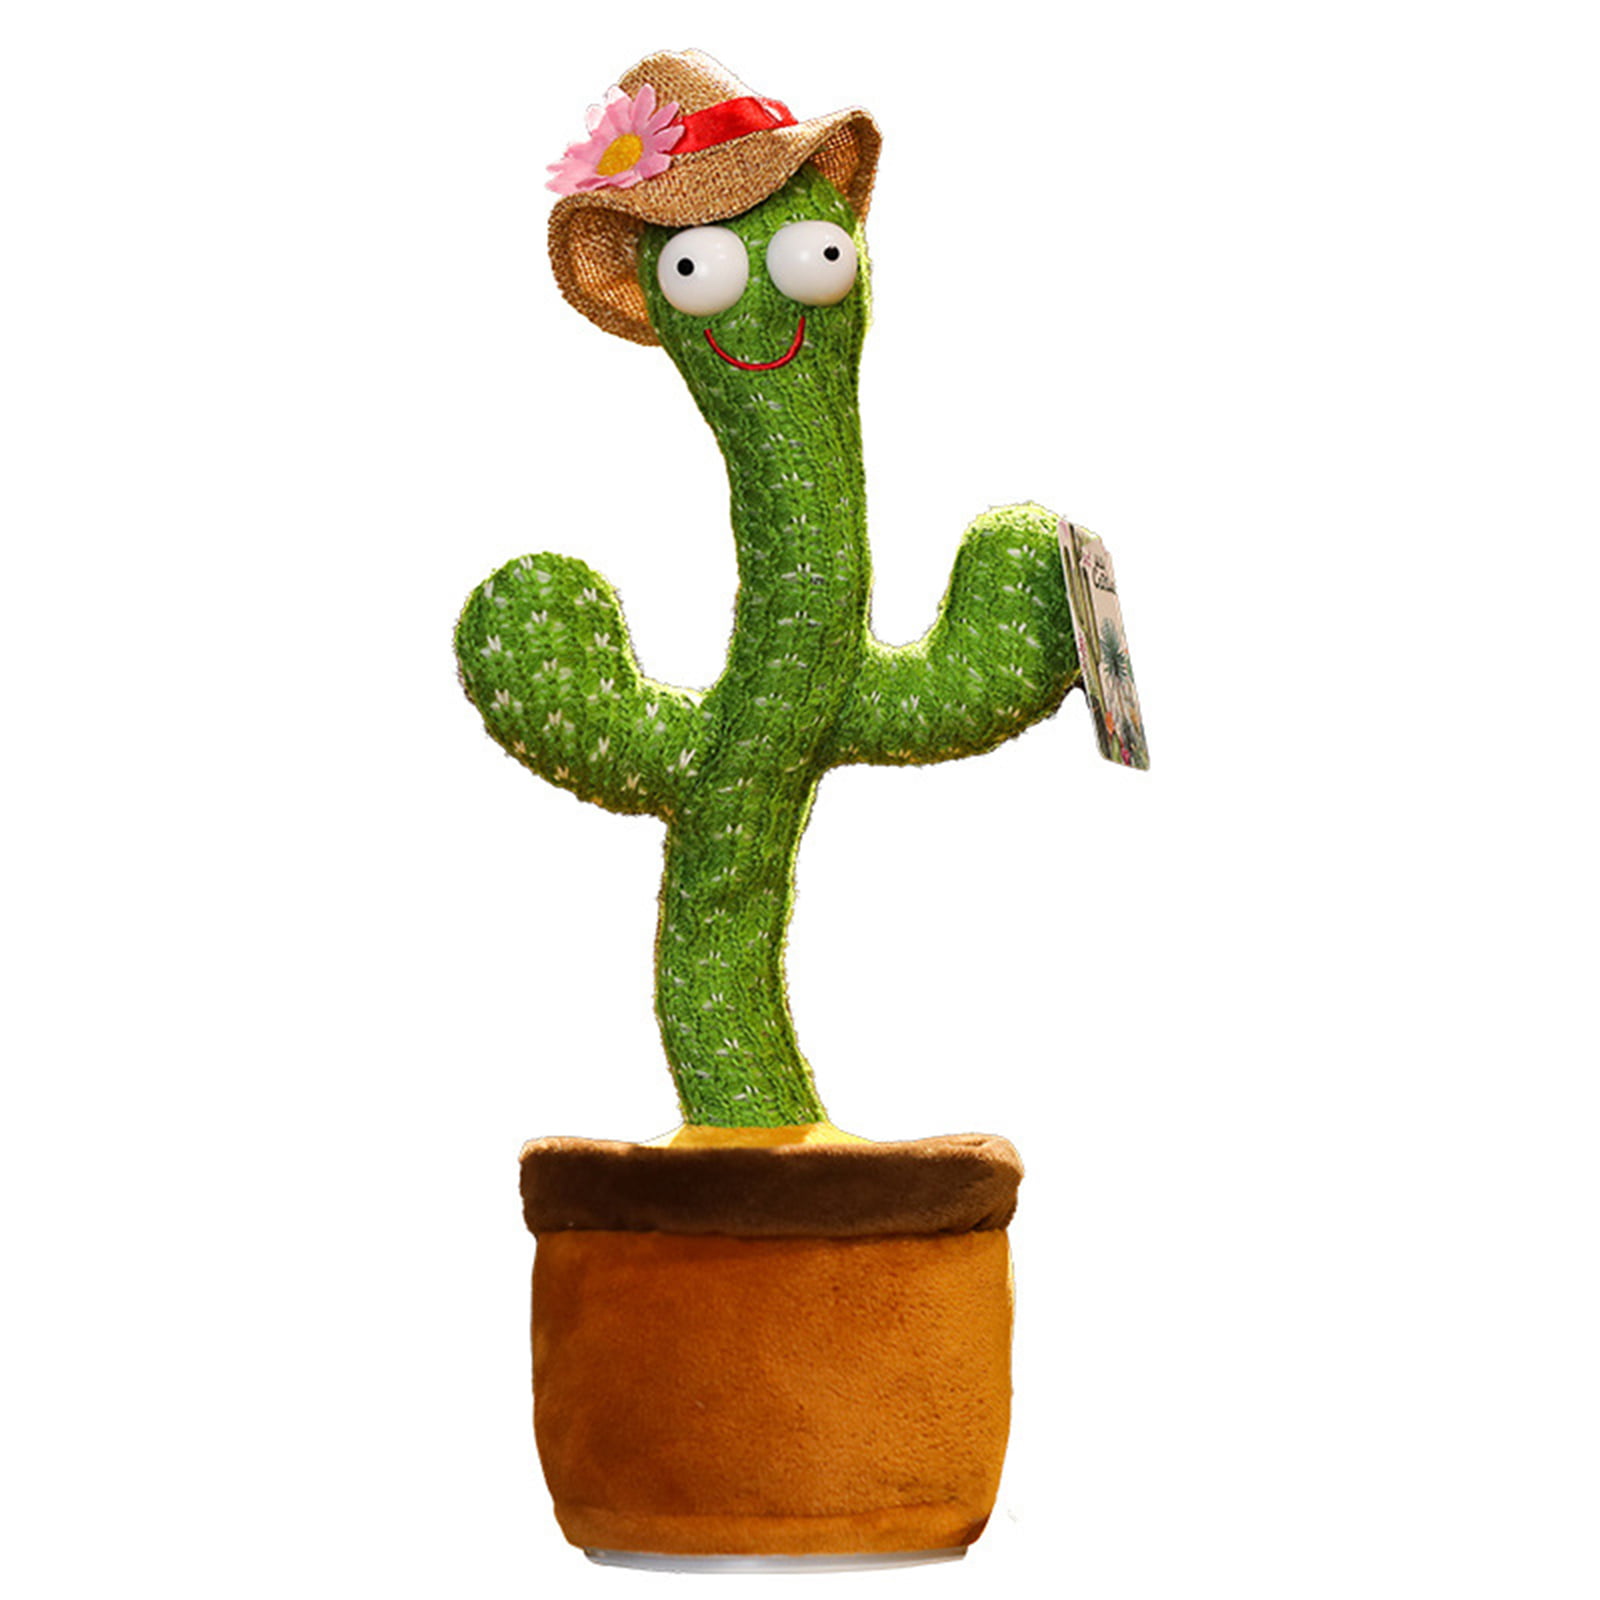 Details about   Dancing Cactus Plush Toy Electronic Shake Spin Cute Dance Doll kids Toys Gift 